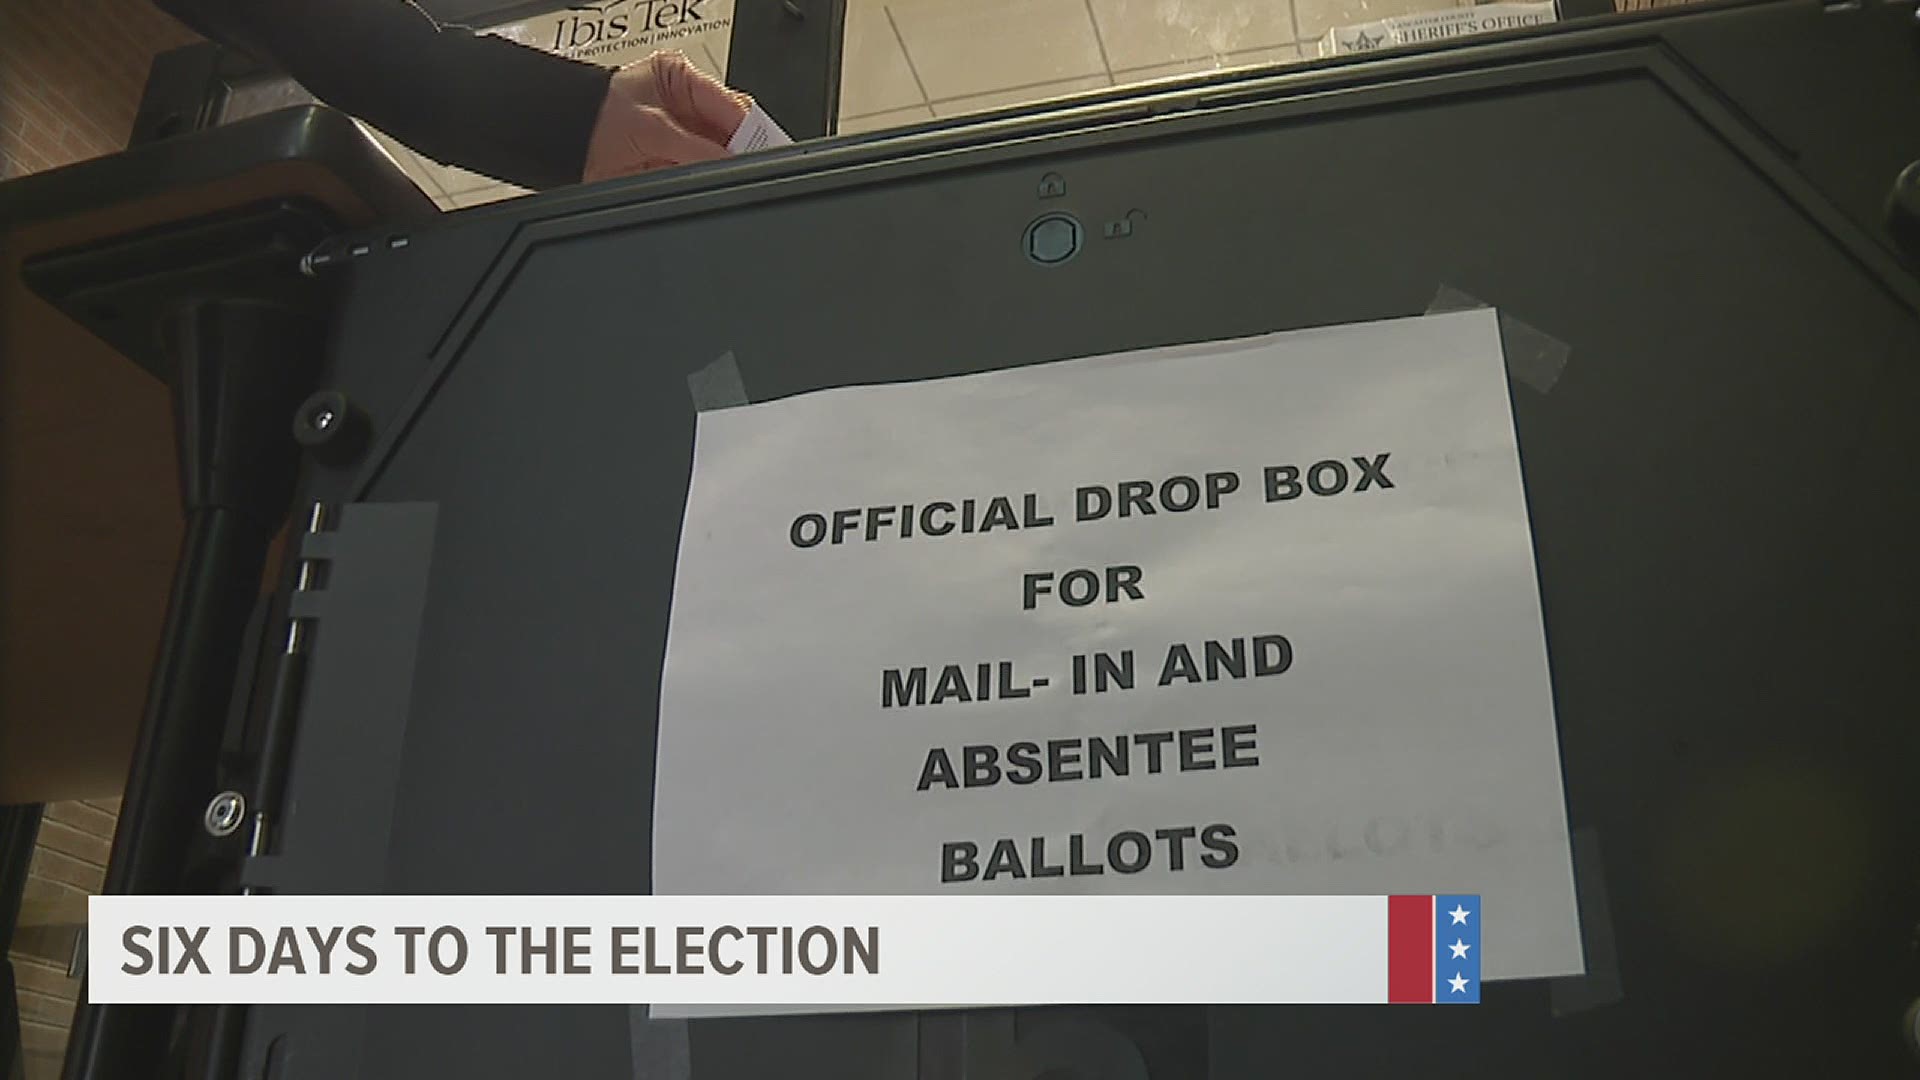 Counties remind voters: if you plan to vote by mail, get those ballots in now. If you plan to vote at the polls, make sure you look up where you're going.